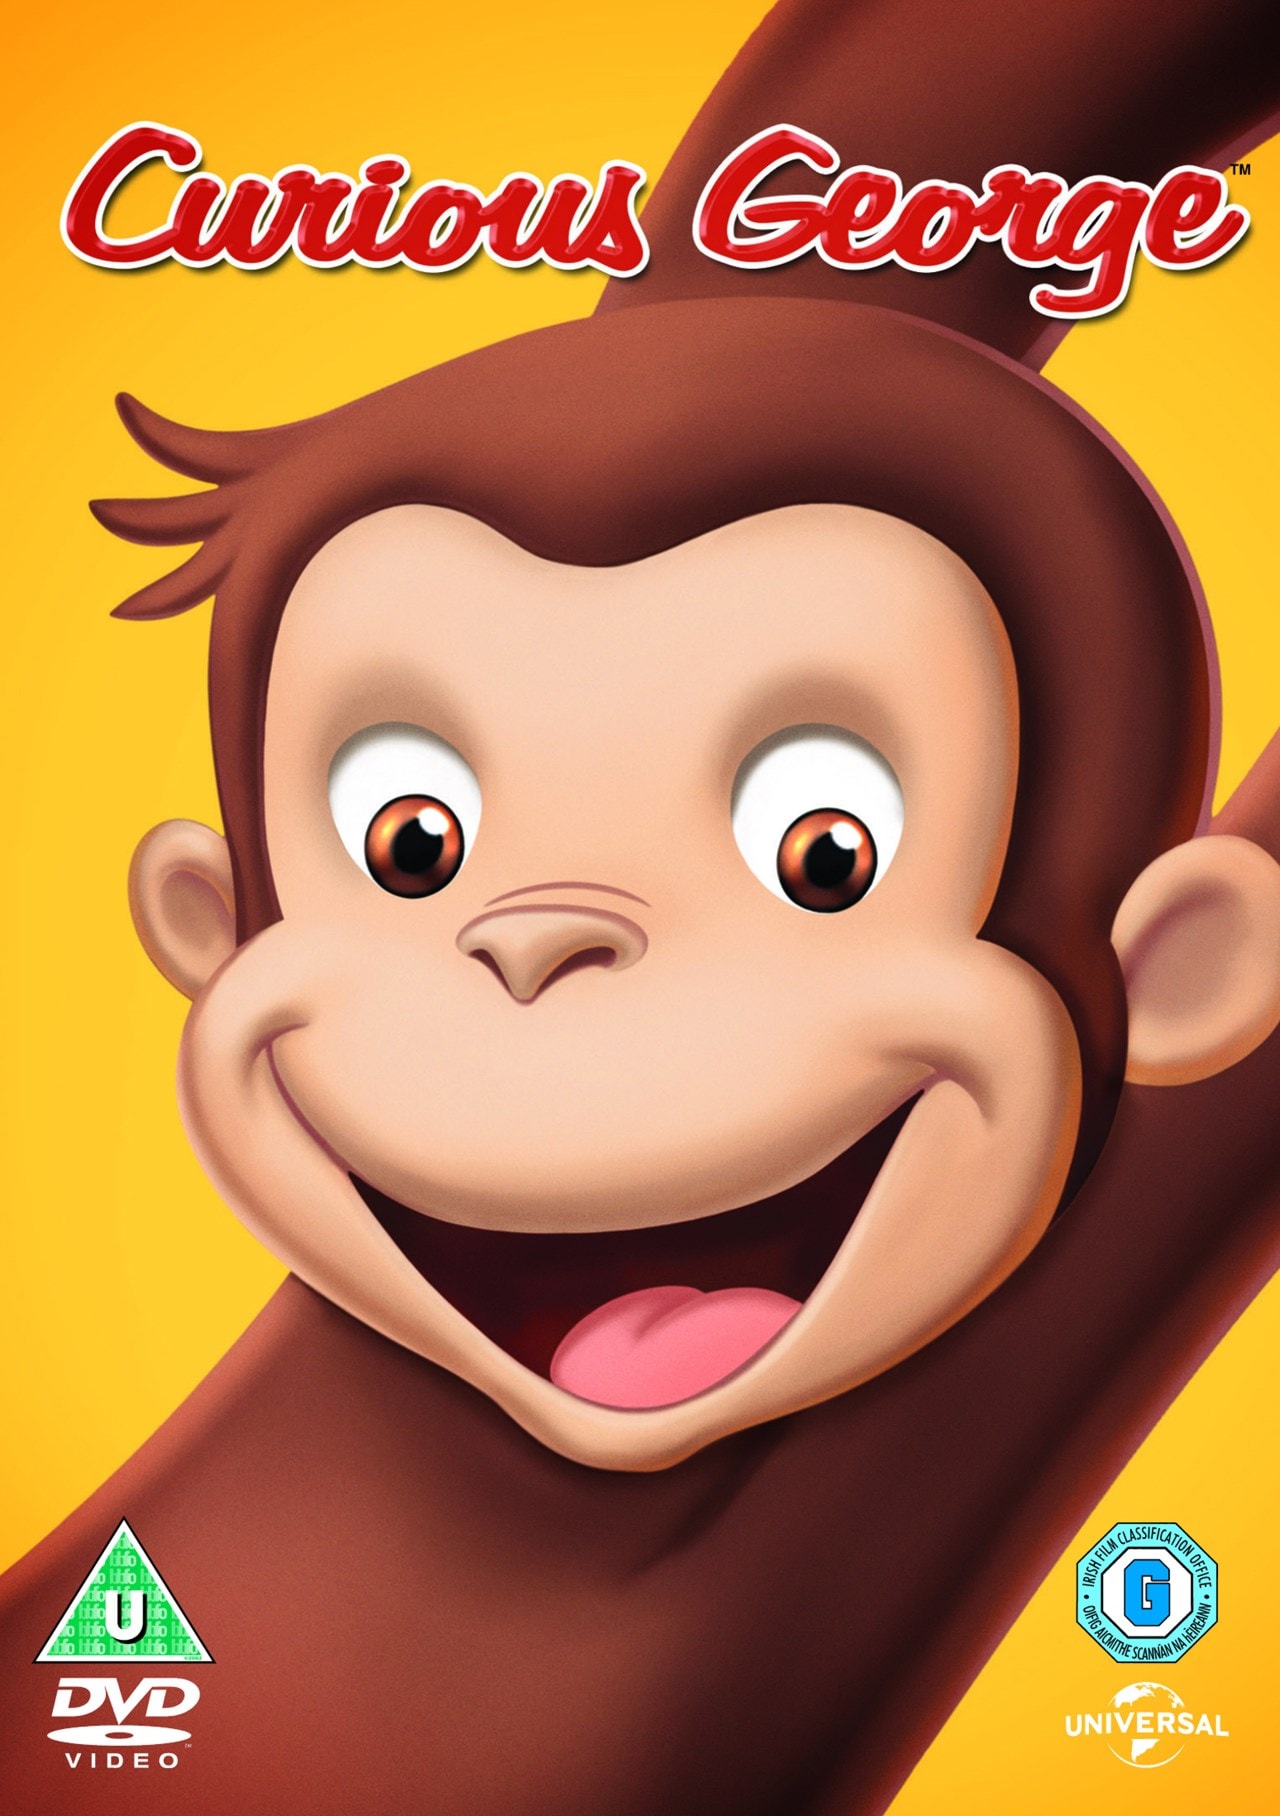 Curious George | DVD | Free shipping over £20 | HMV Store